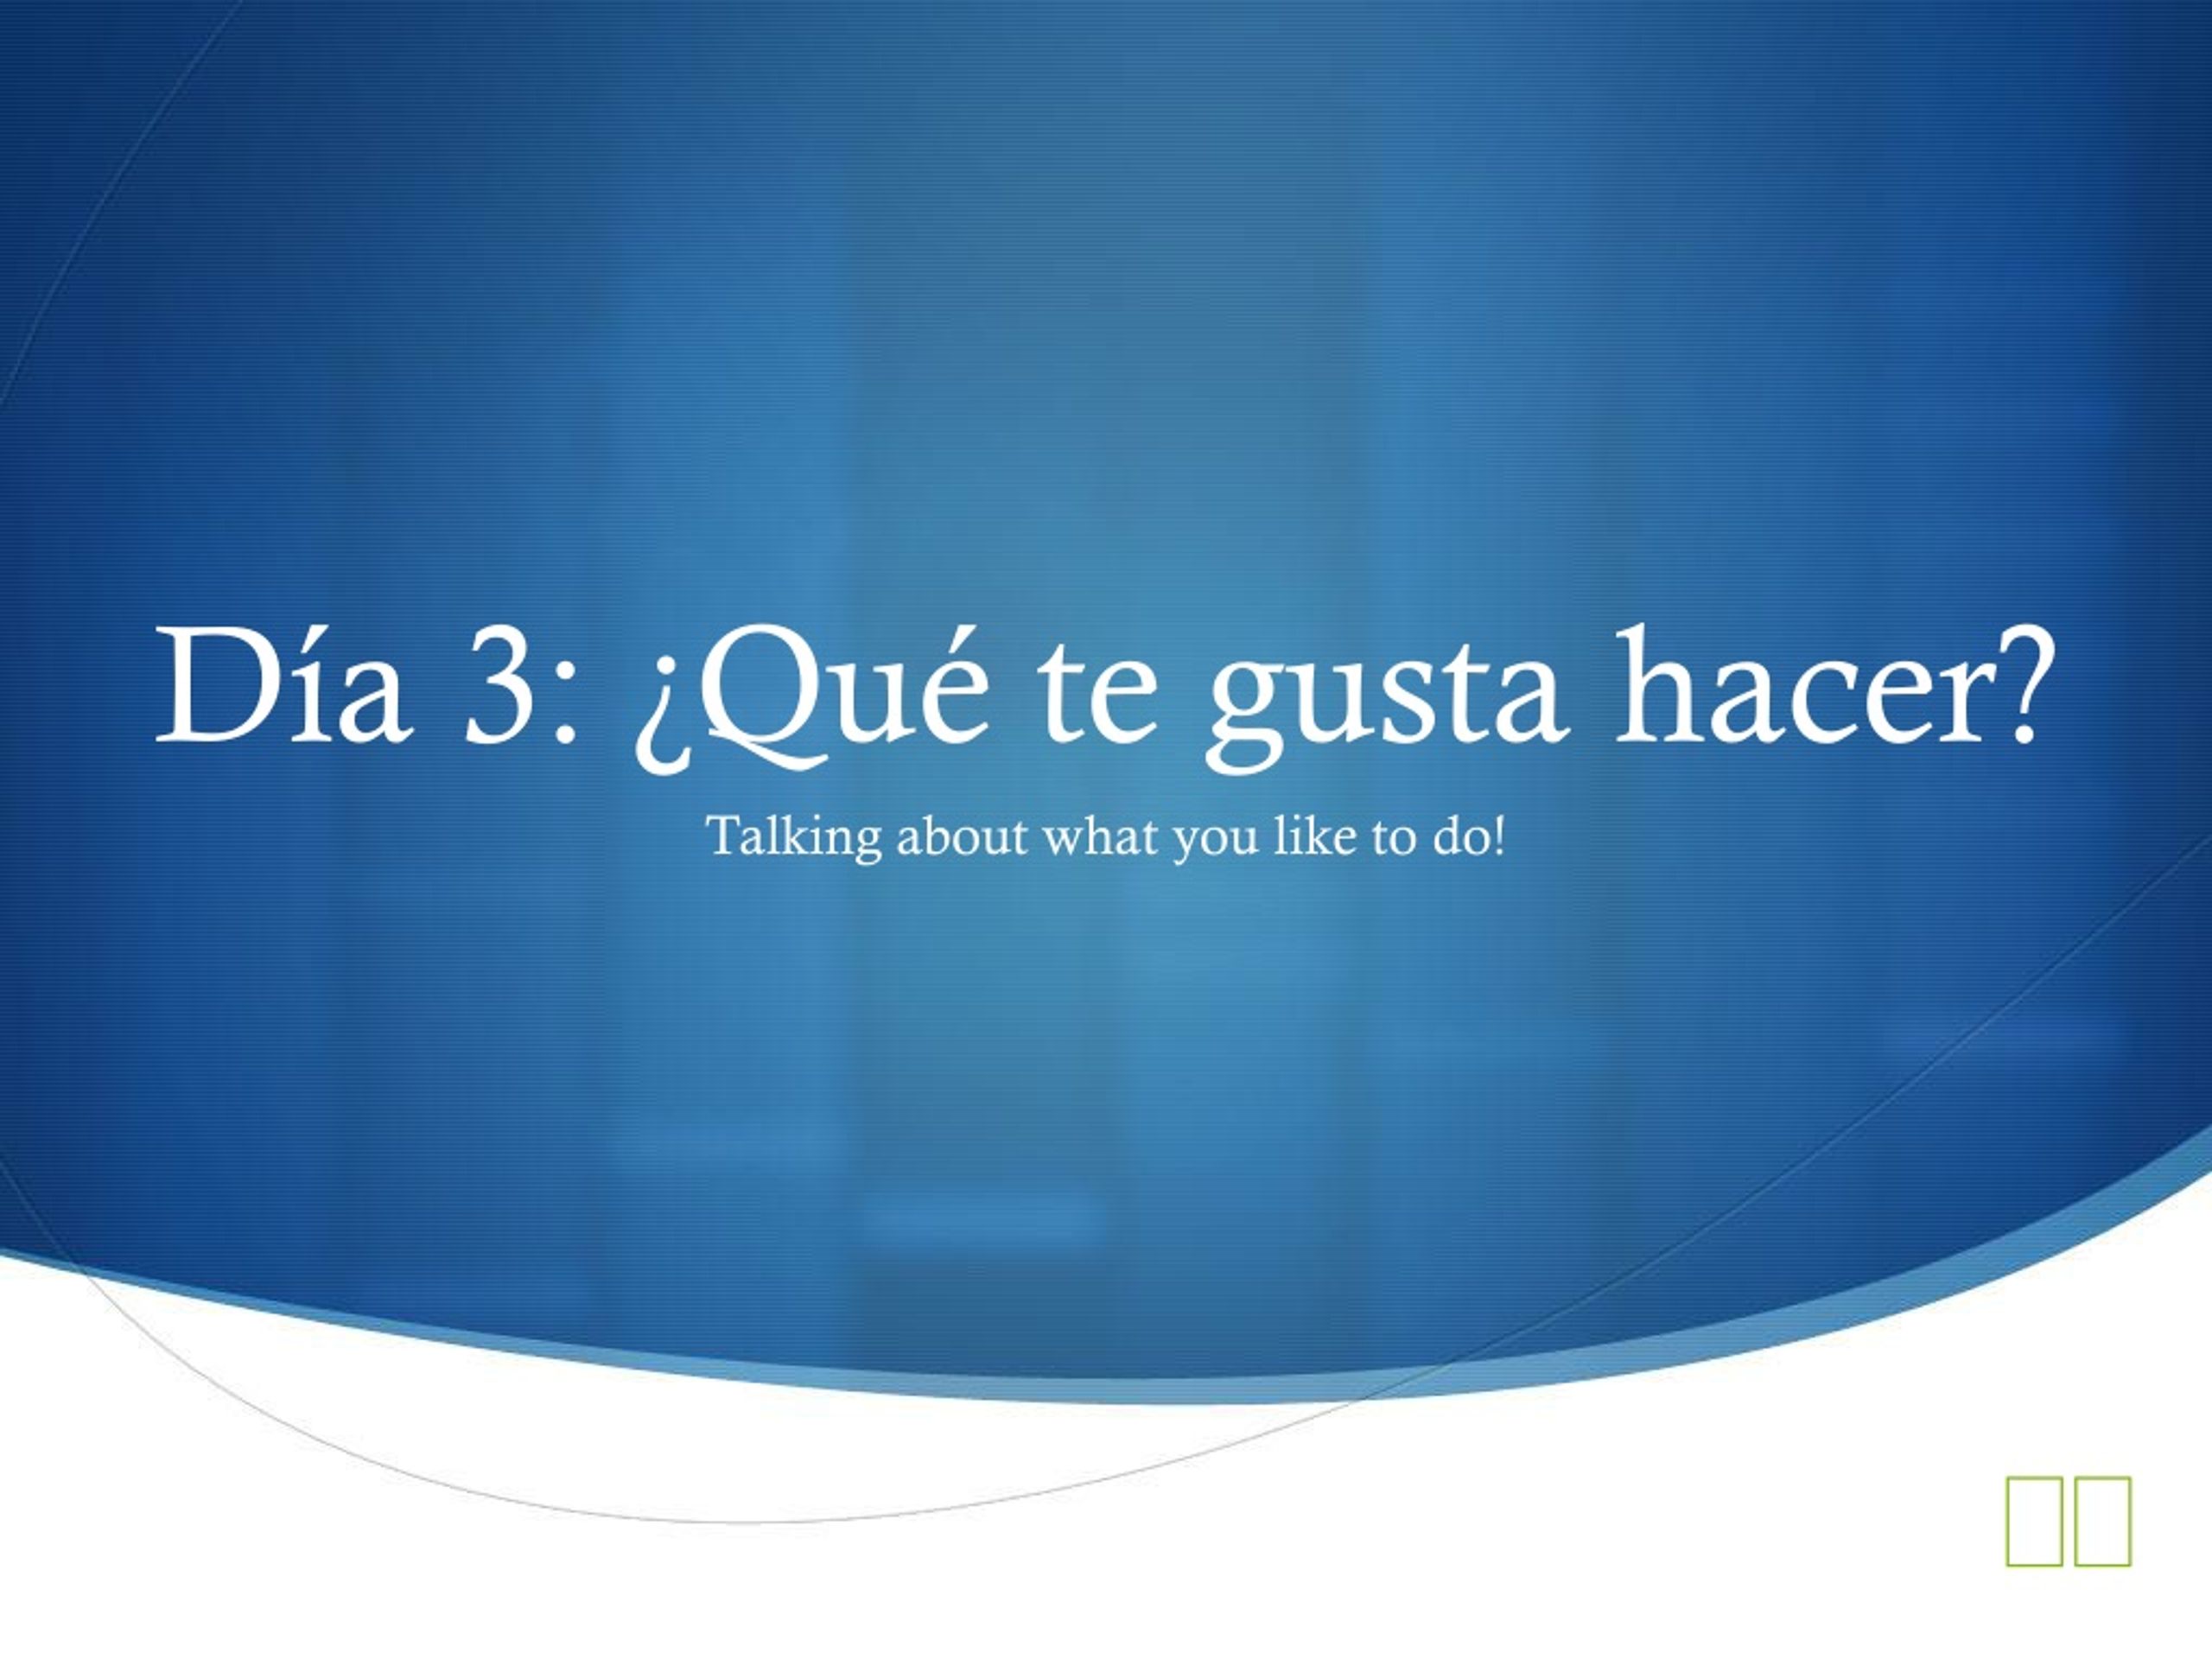 What does te gusta mean in spanish